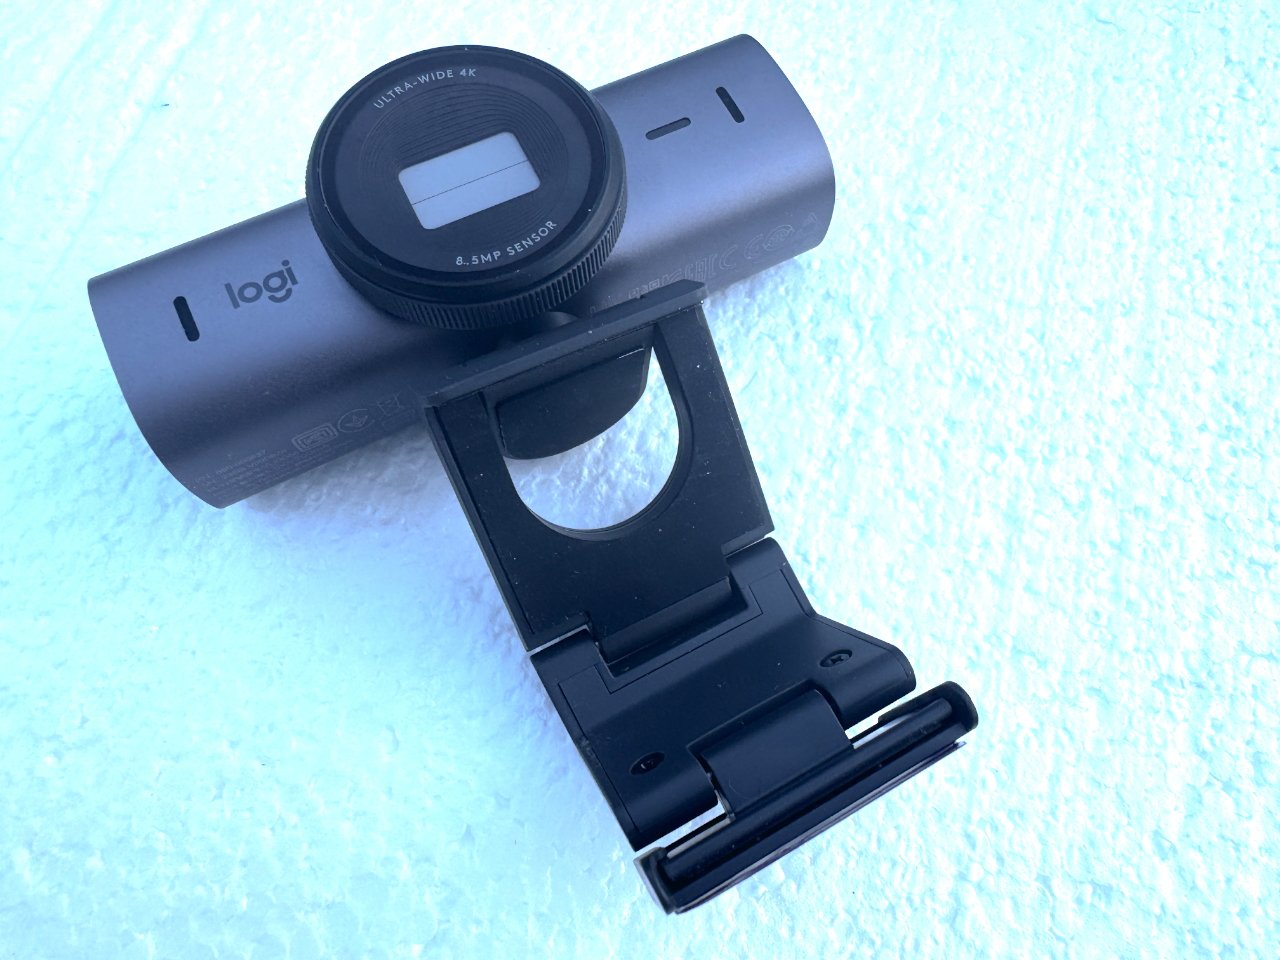 Logitech 4K webcam with lens cap on, mounted on a black monitor clip against a textured light blue background.